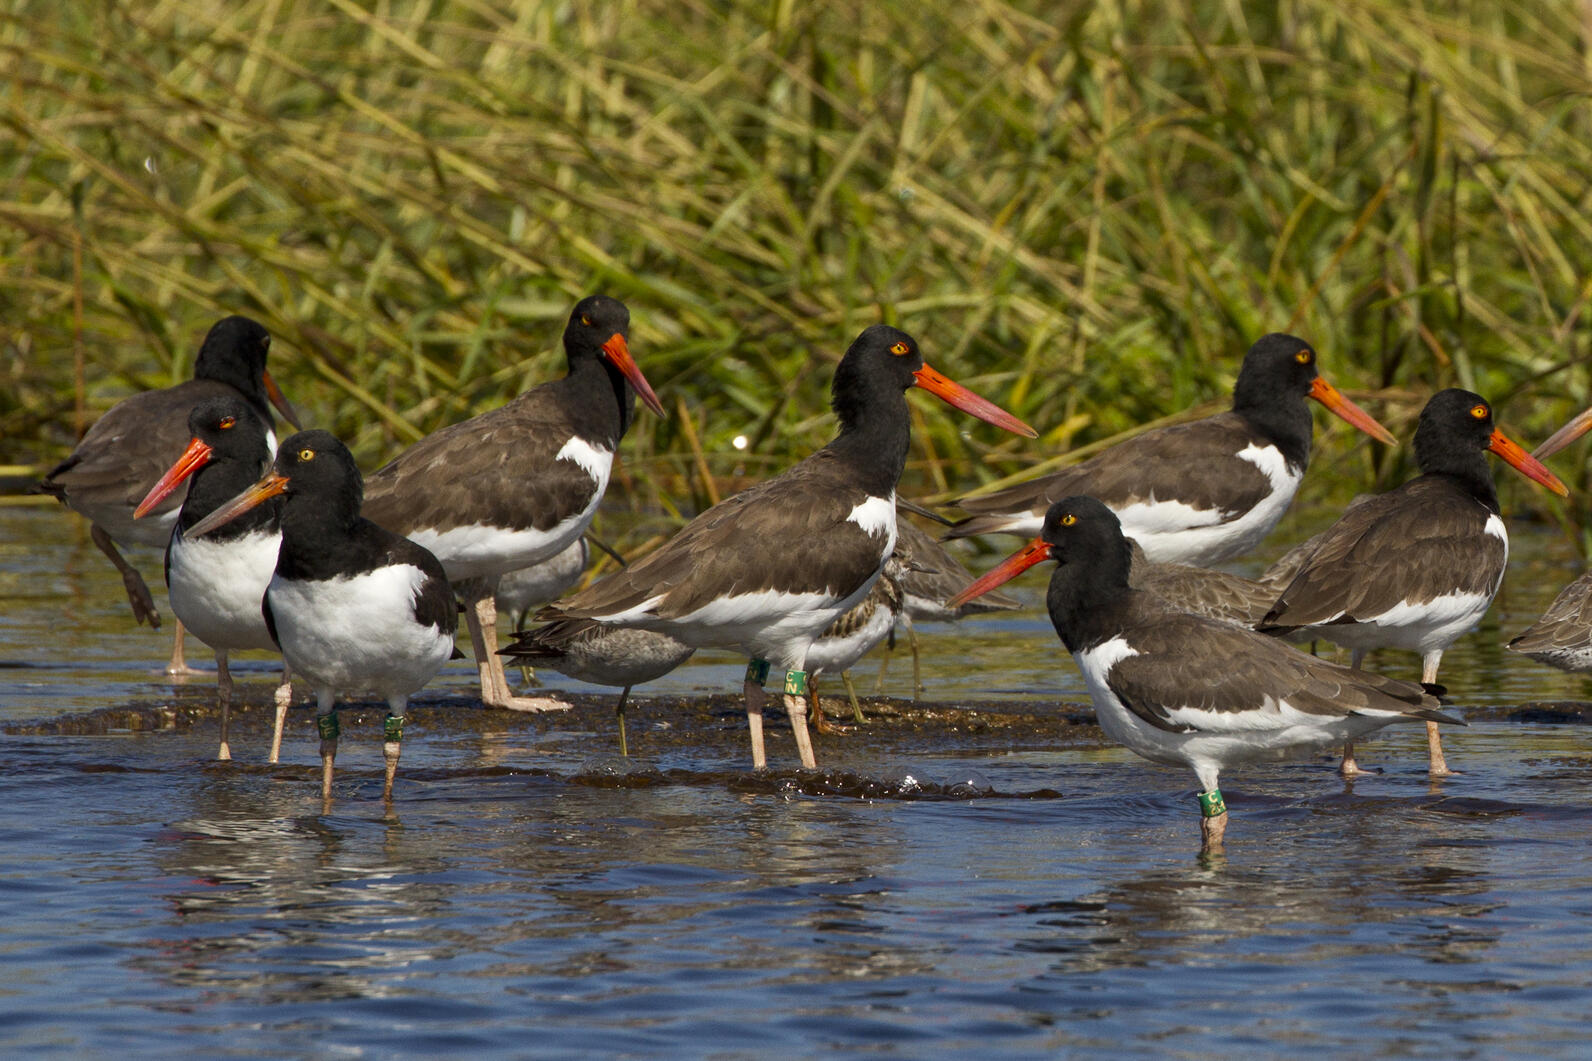 Banded oystercatchers standing near shore